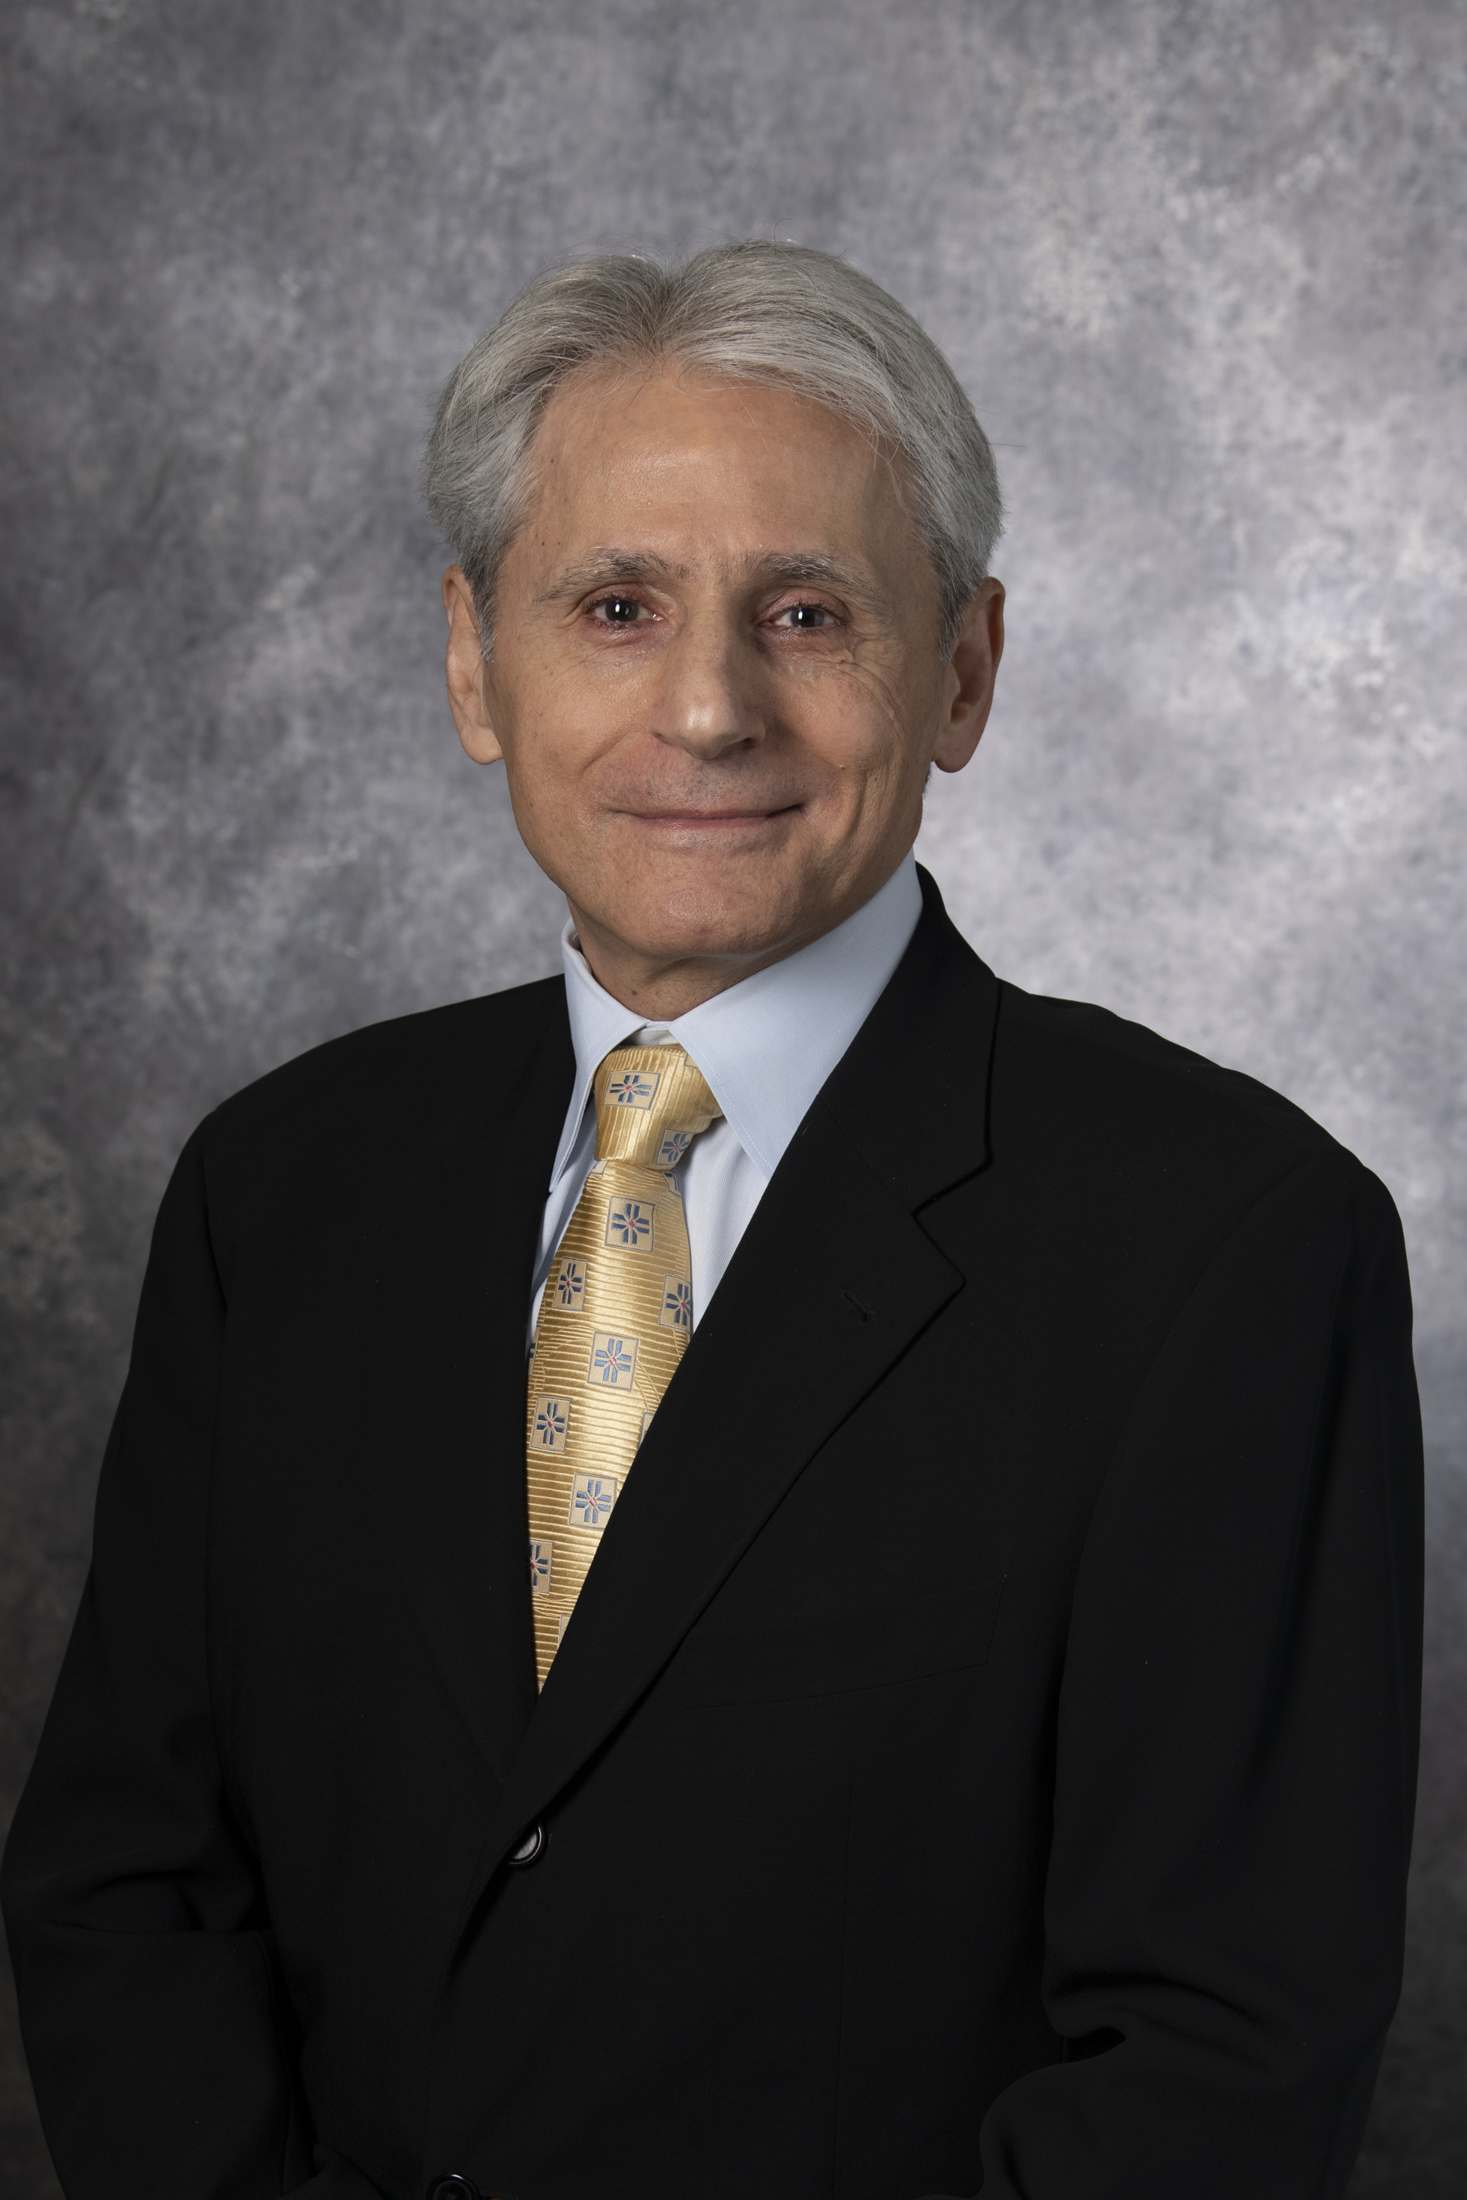 A headshot of Peter E. Raad, a member of the Lyle School of Engineering Faculty.